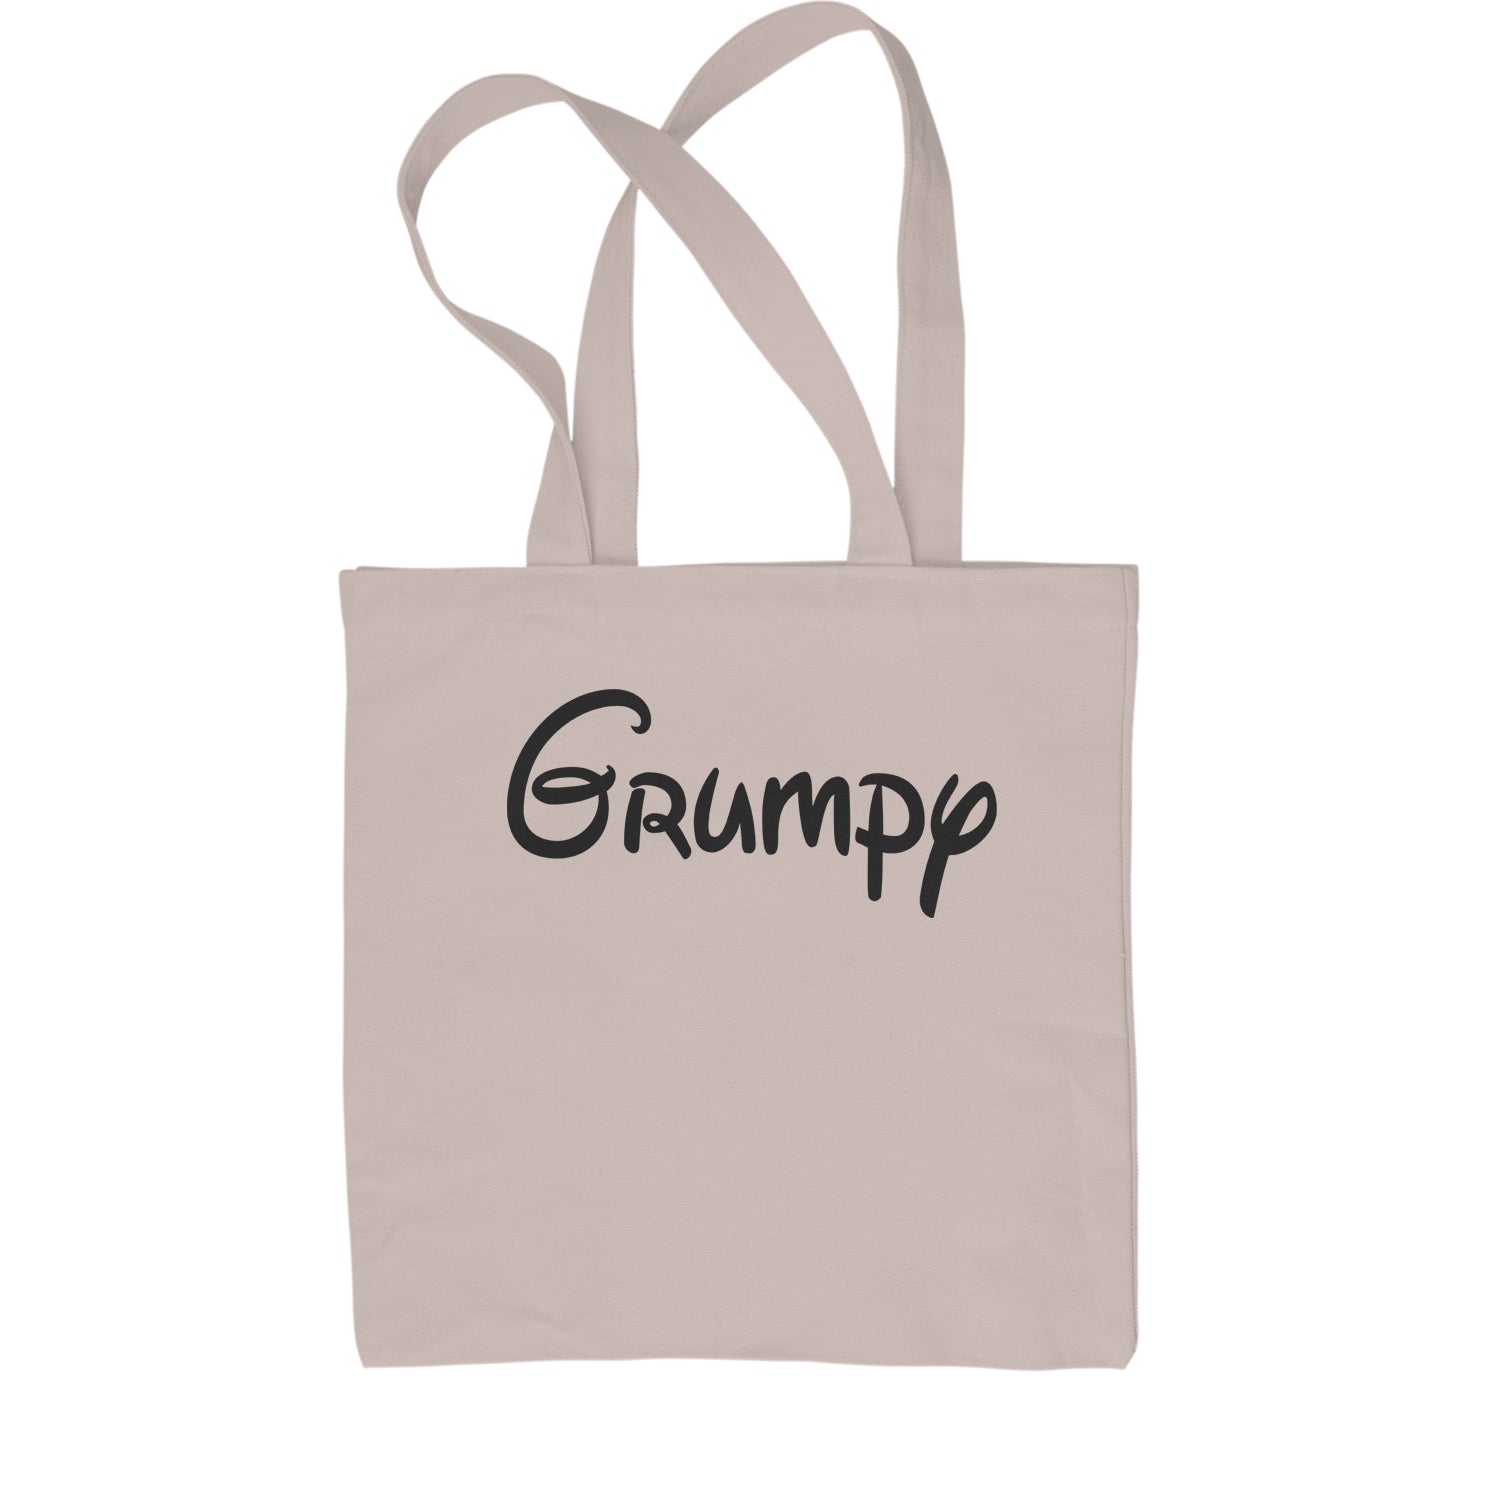 Grumpy - 7 Dwarfs Costume Shopping Tote Bag and, costume, dwarfs, group, halloween, matching, seven, snow, the, white by Expression Tees